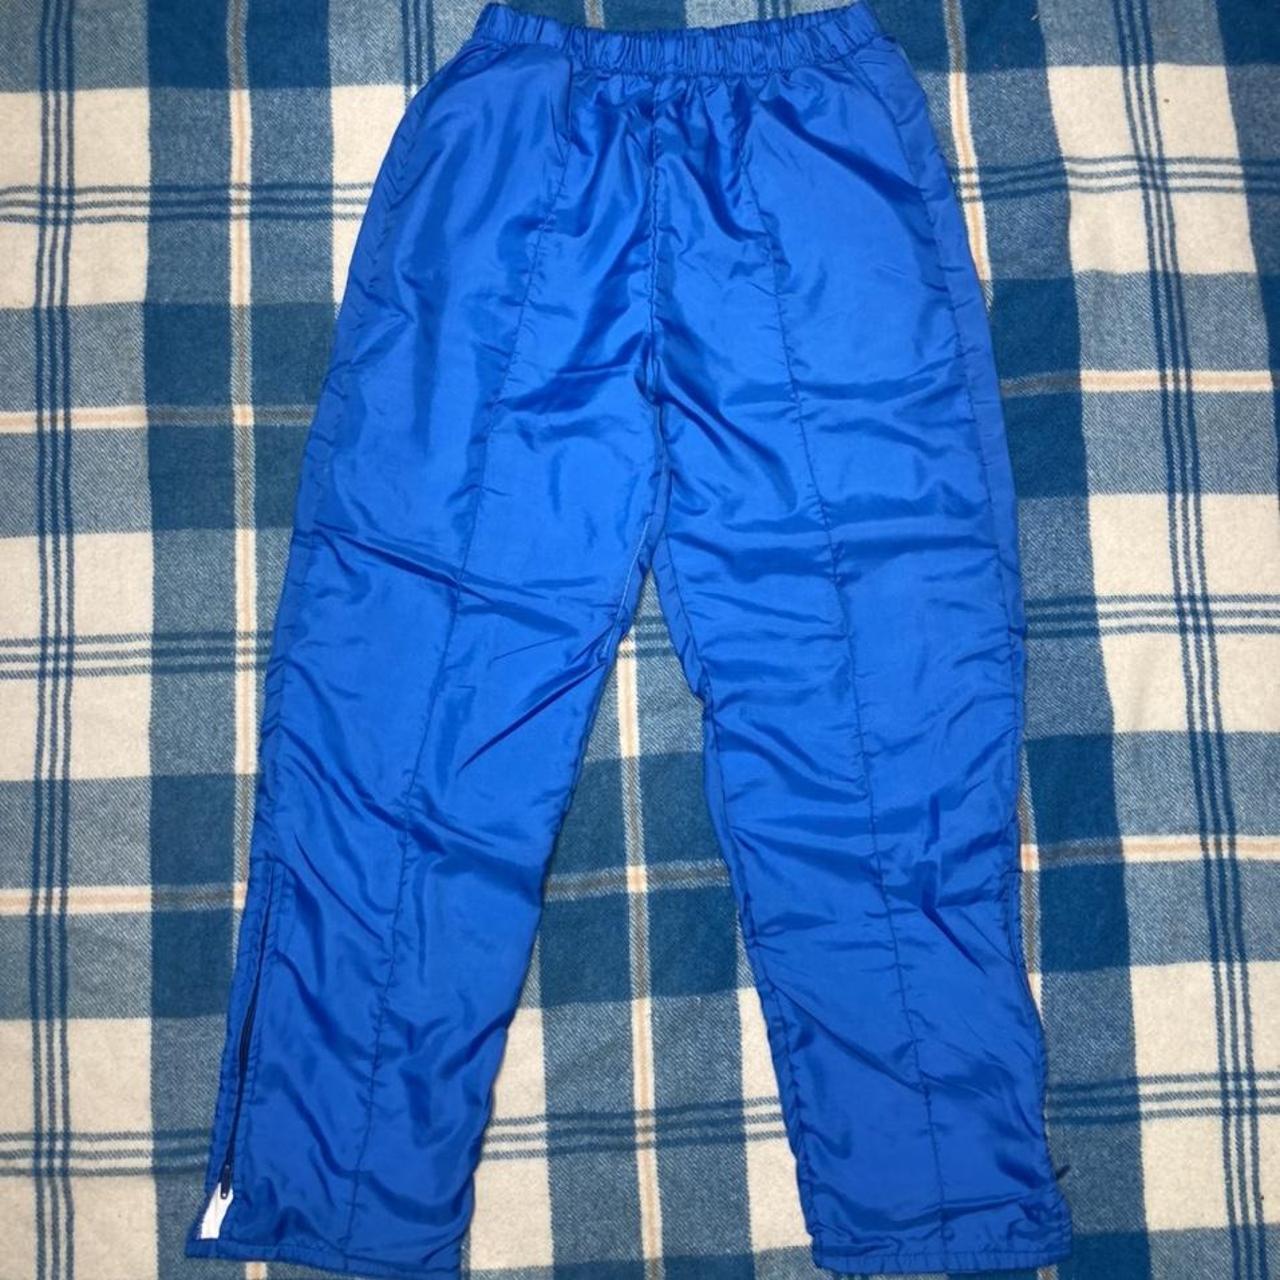 Vintage 80s Holloway track pants insulated blue - Depop